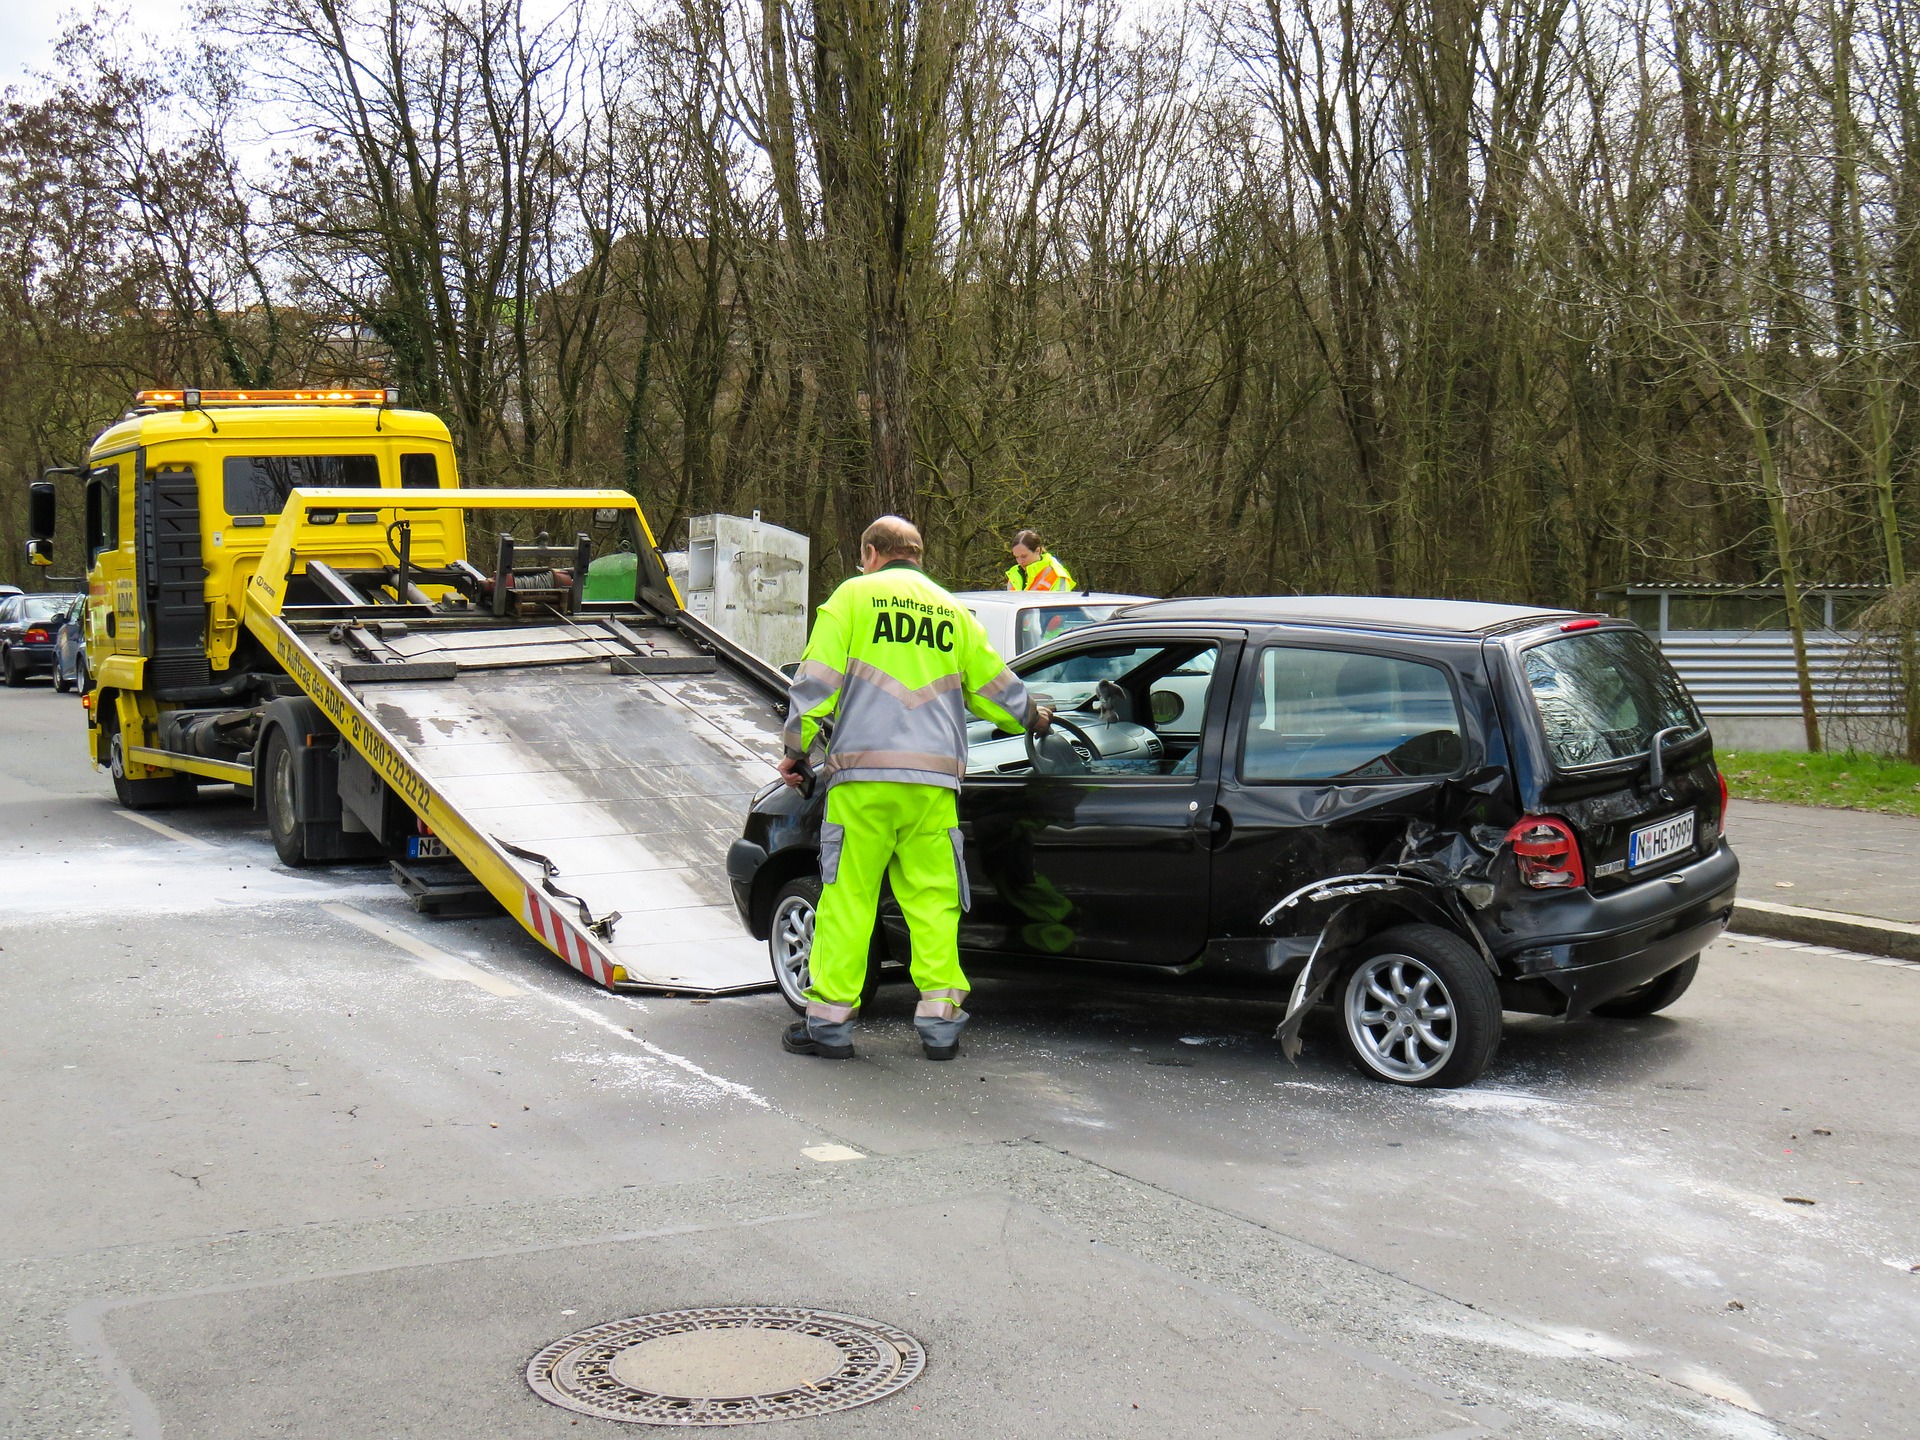 Flatbed Vs Wheel Lift Tow Truck: What's The Difference?